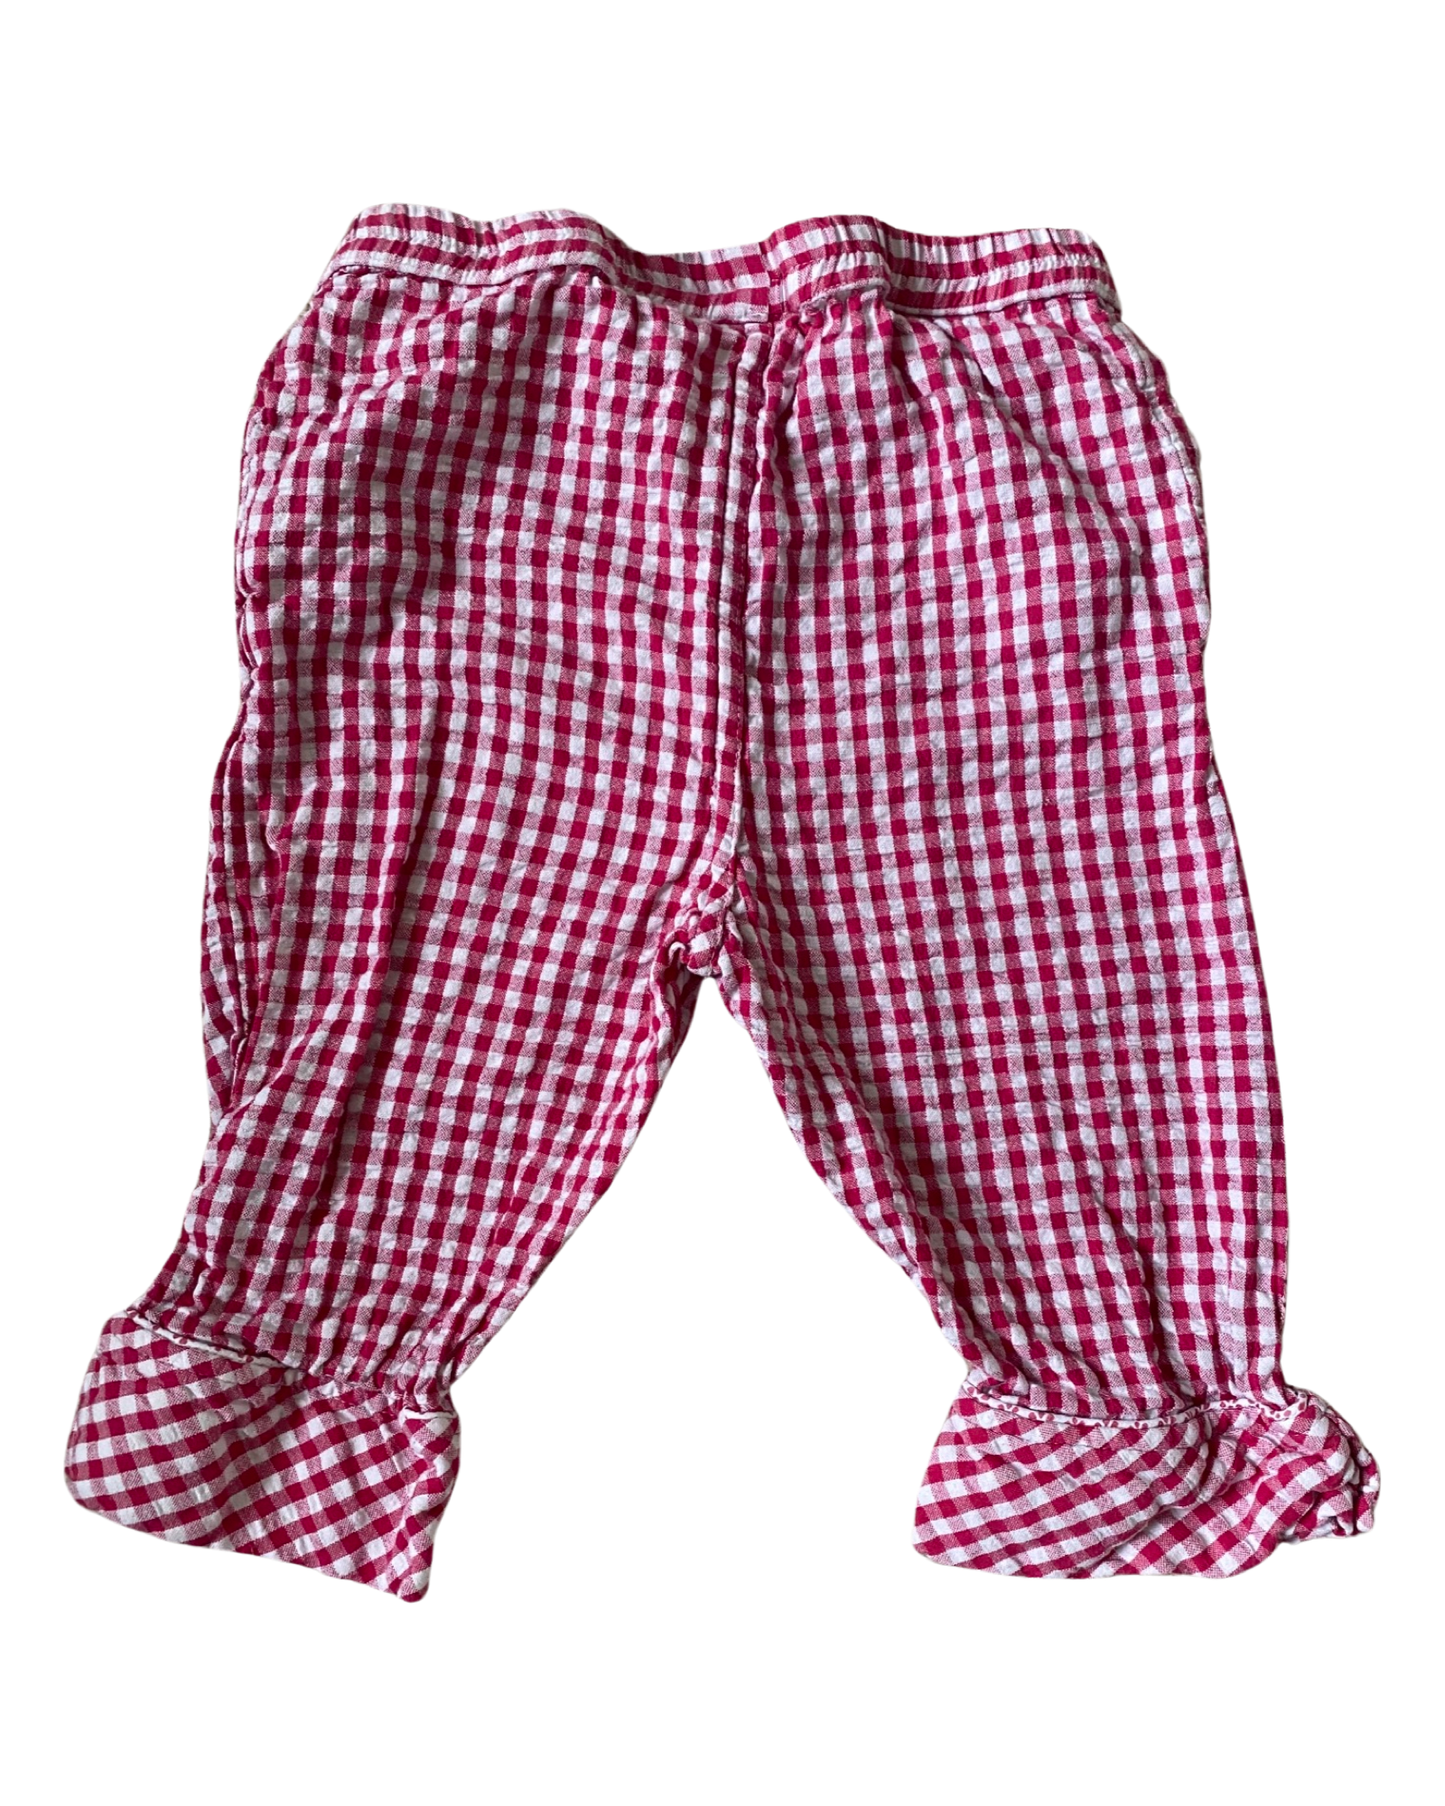 JoJo Maman Bebe pink gingham cropped trousers (size 2-3yrs)